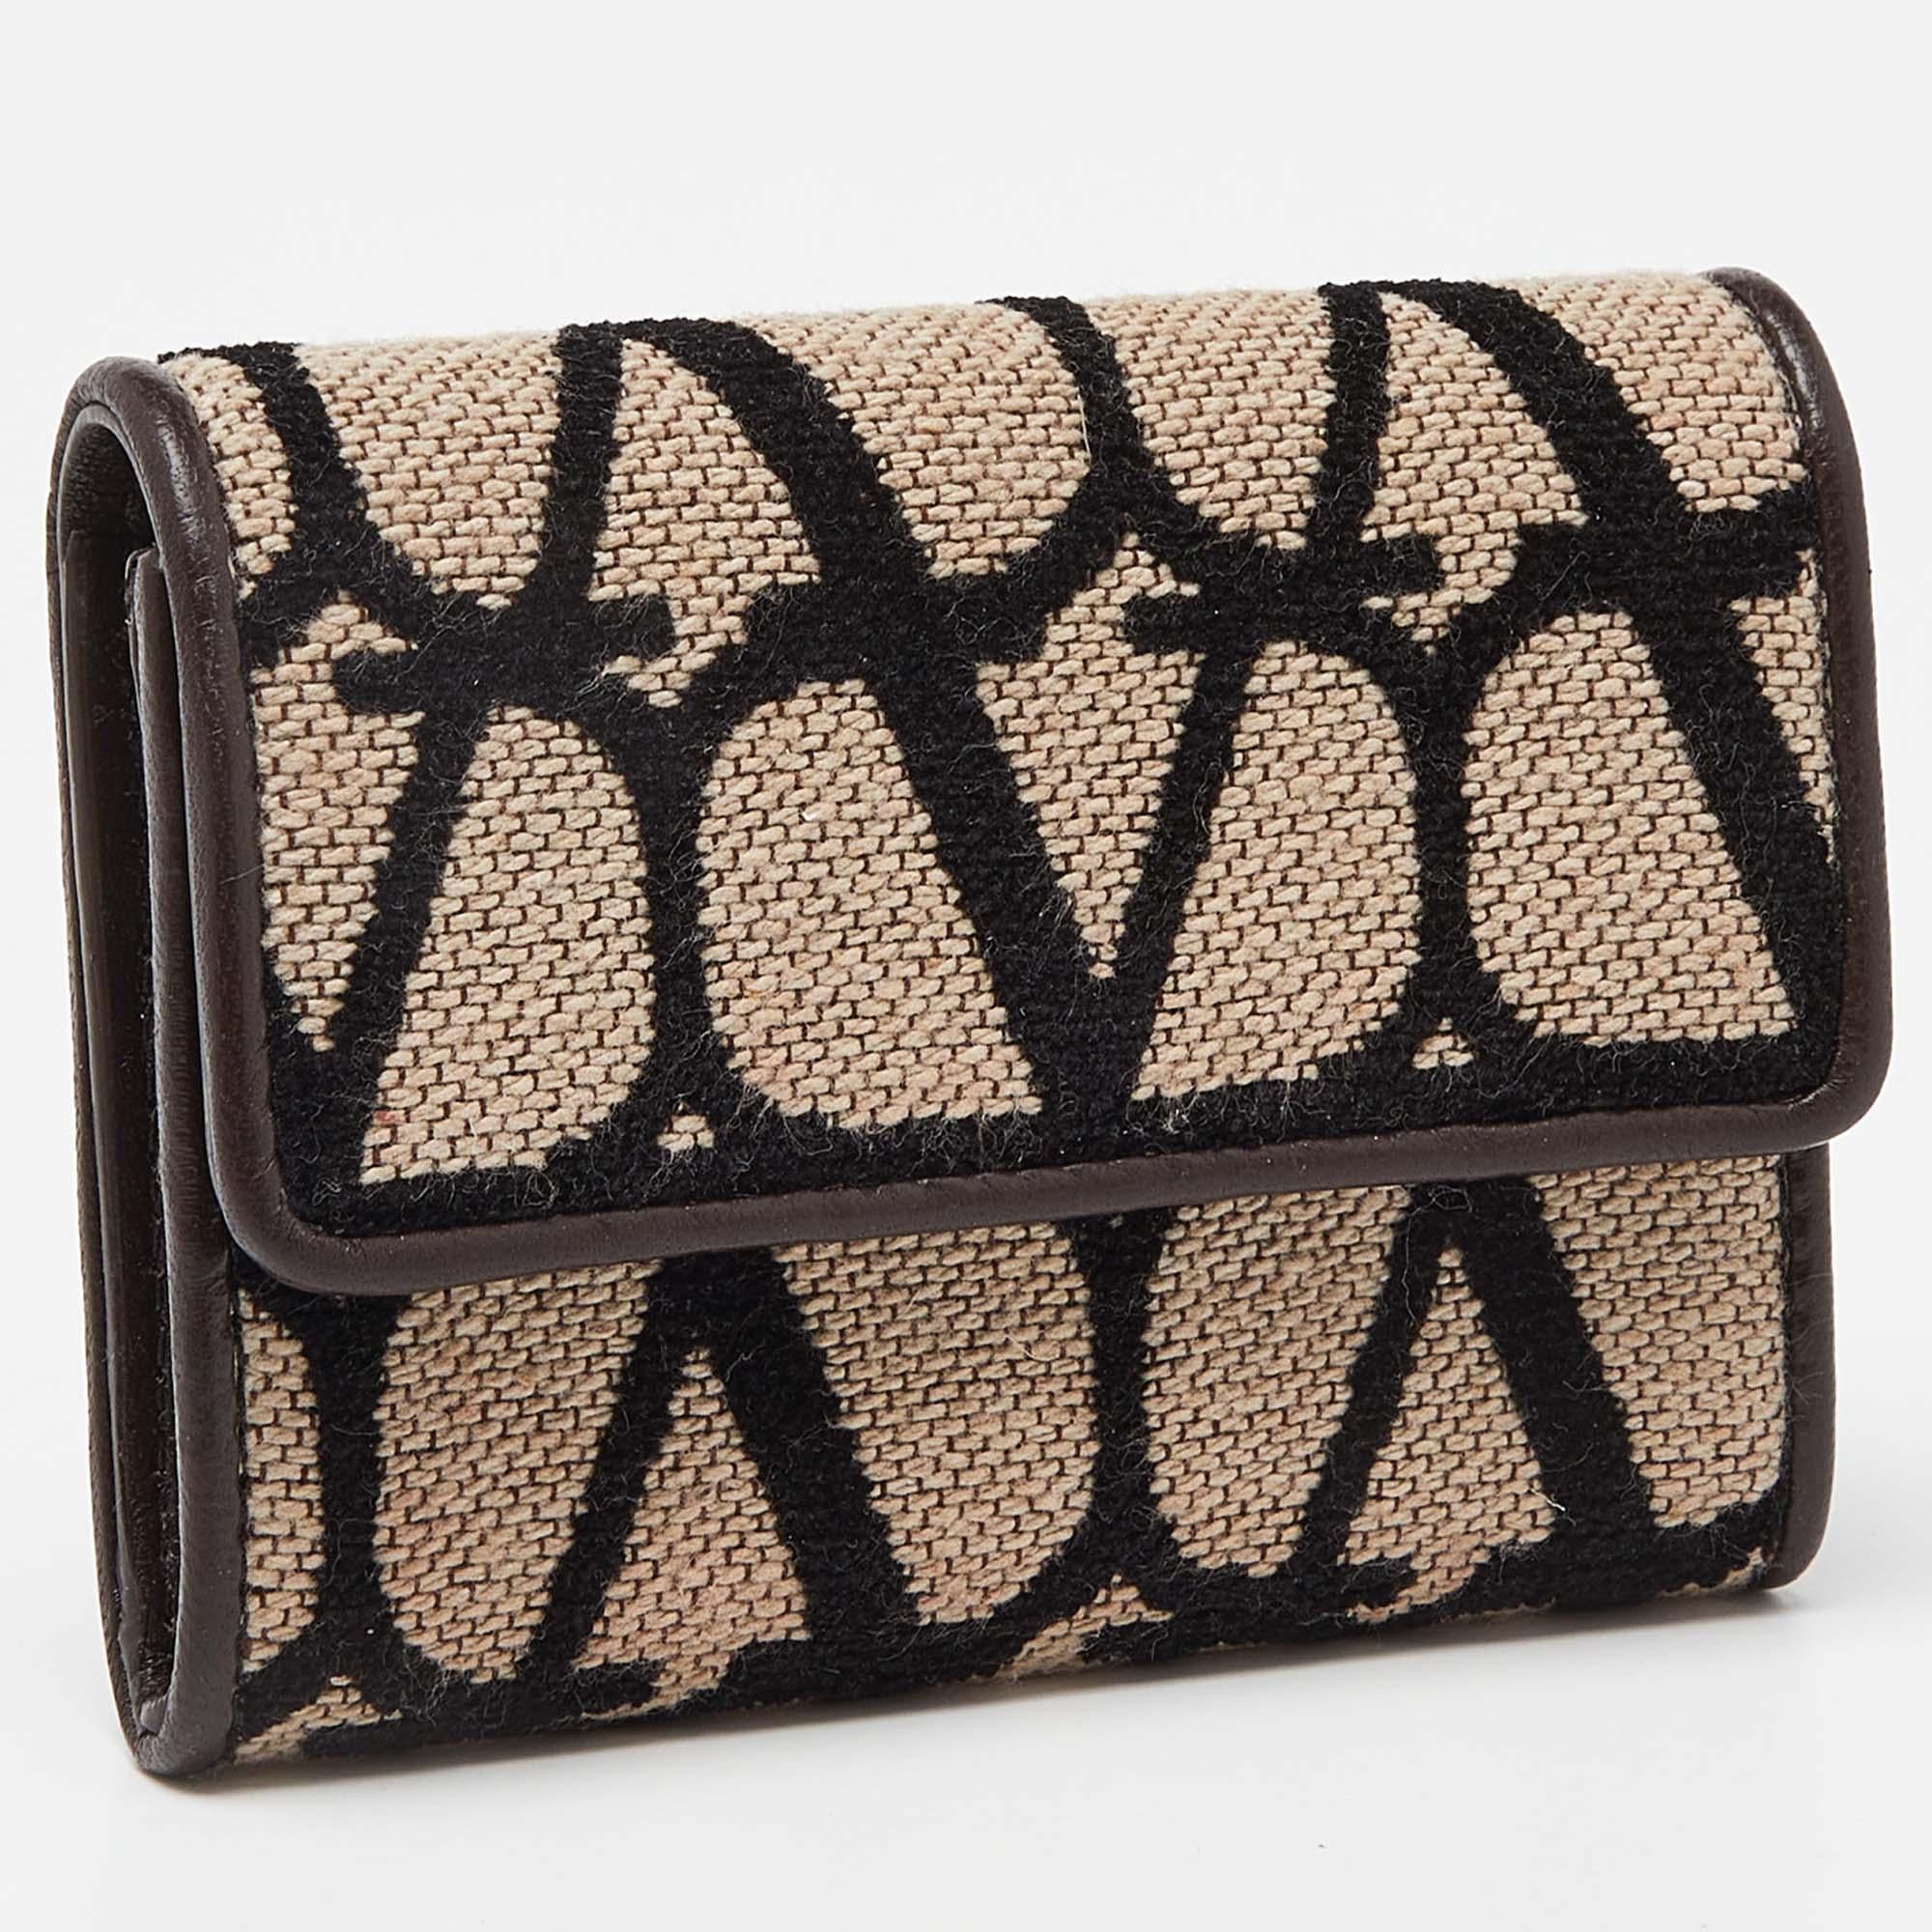 Beautifully shaped into a petite silhouette and augmented with iconic brand motifs, this wallet from the House of Valentino will surely be your favorite accessory. It is made from tri-color fabric and leather, with a leather interior.

